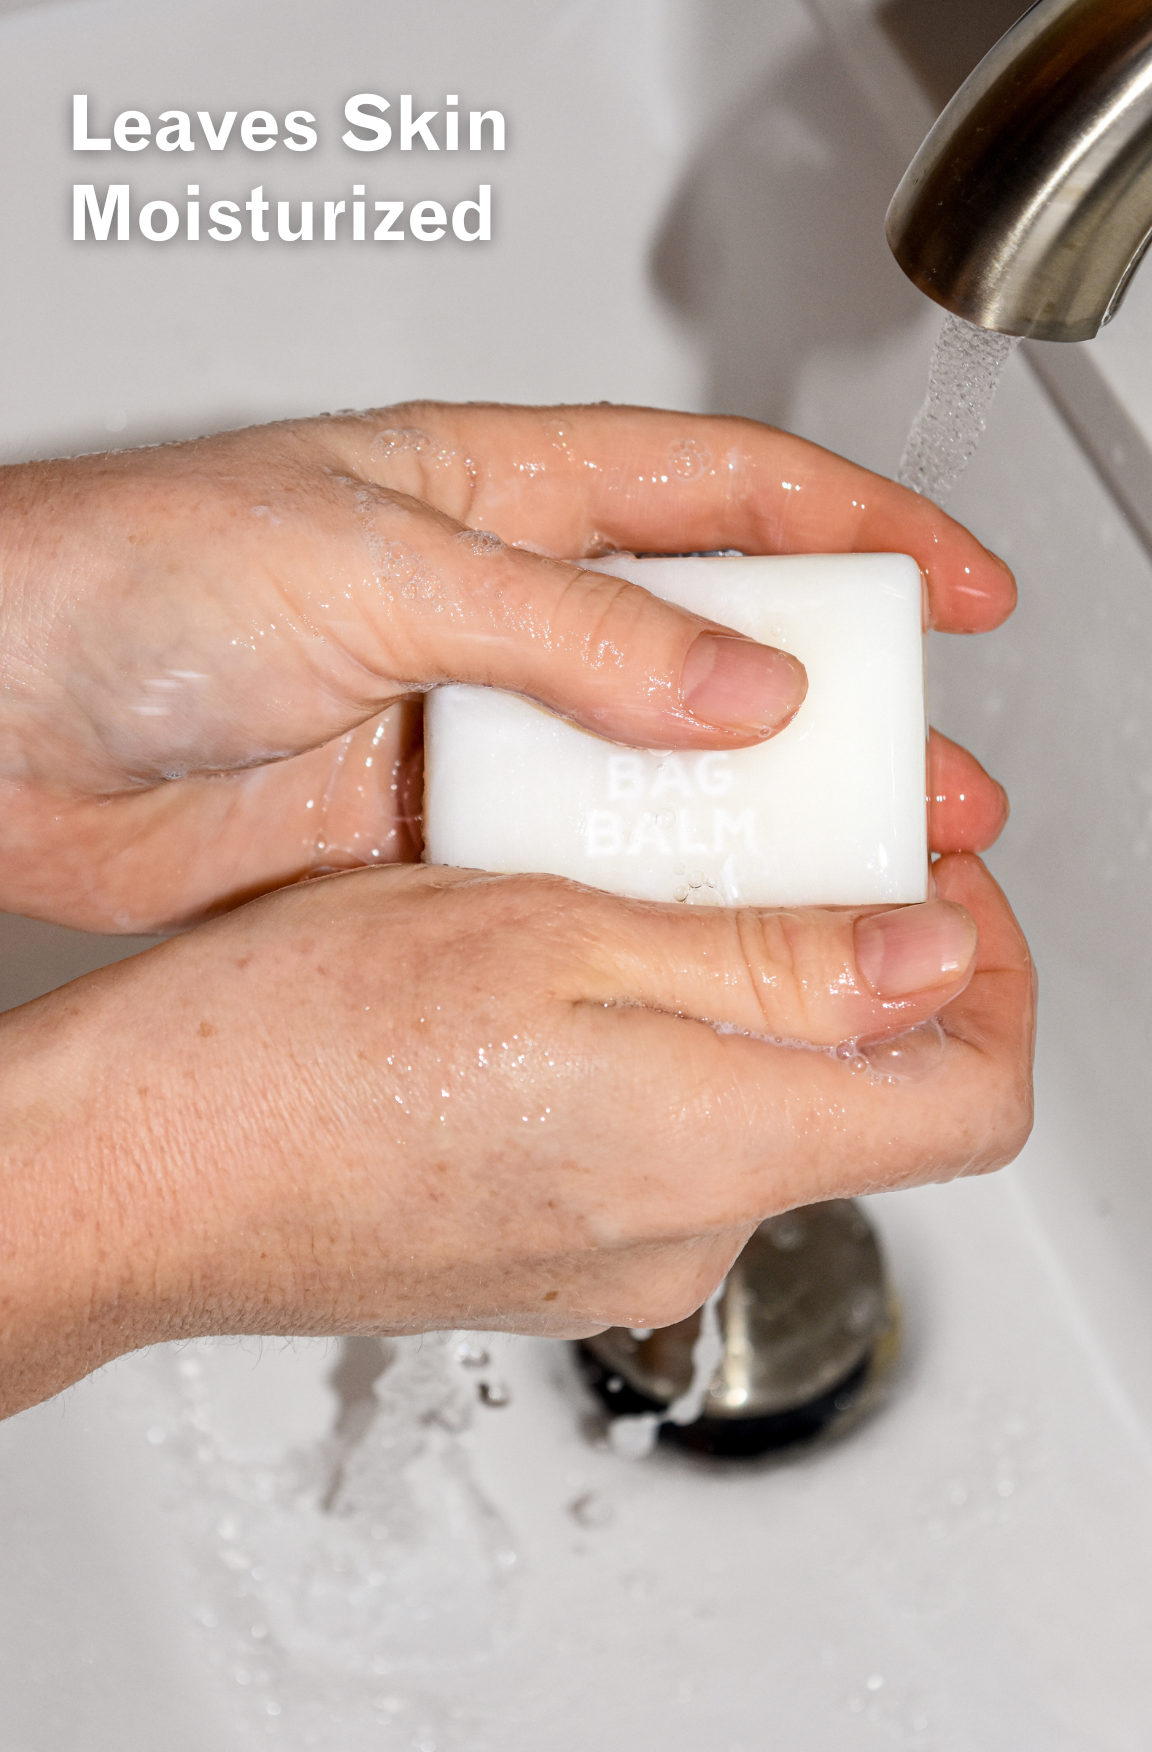 Hands under running water holding bar of soap